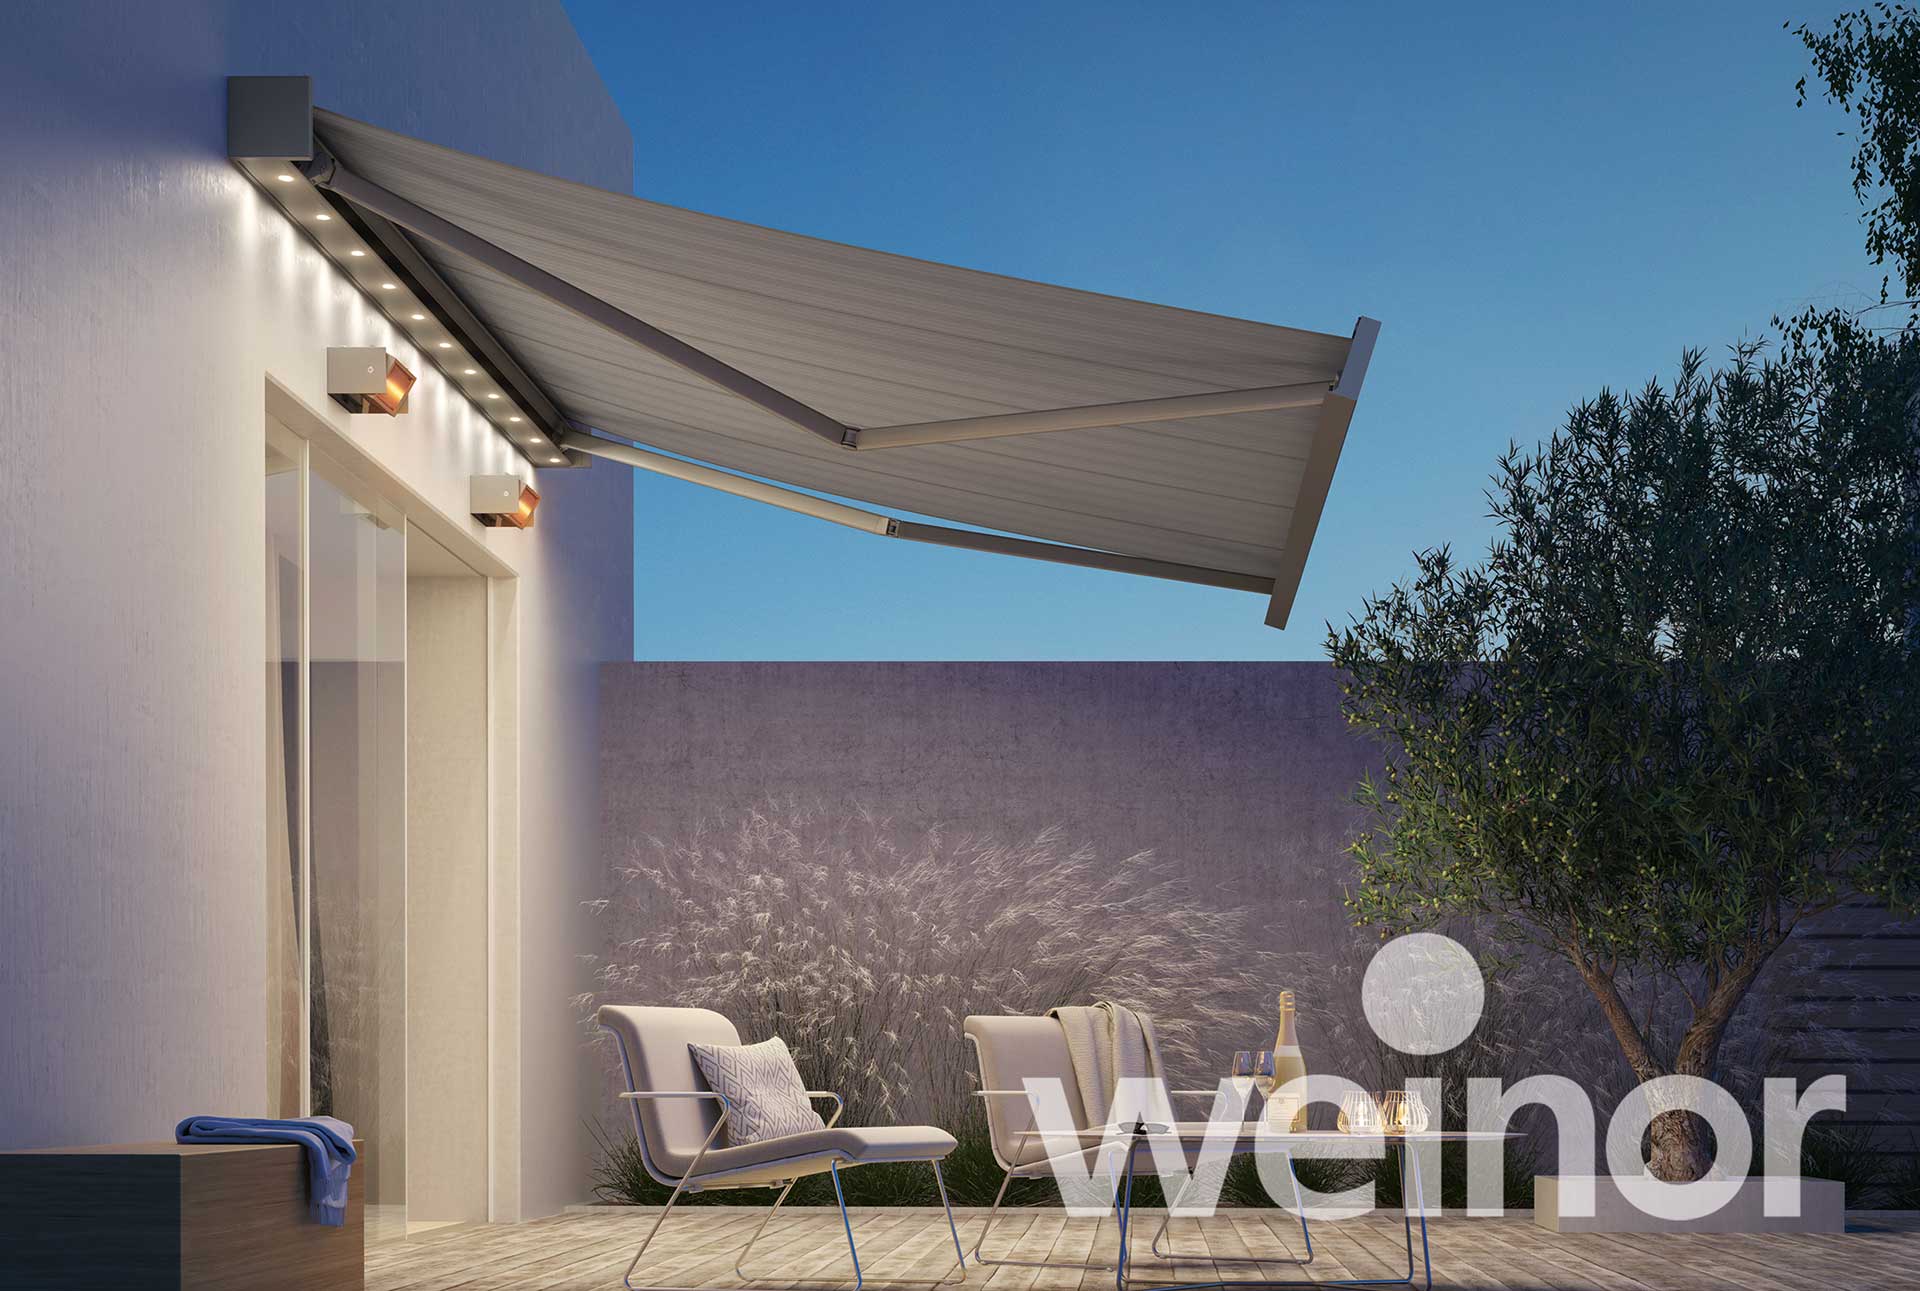 Awnings for your home or business